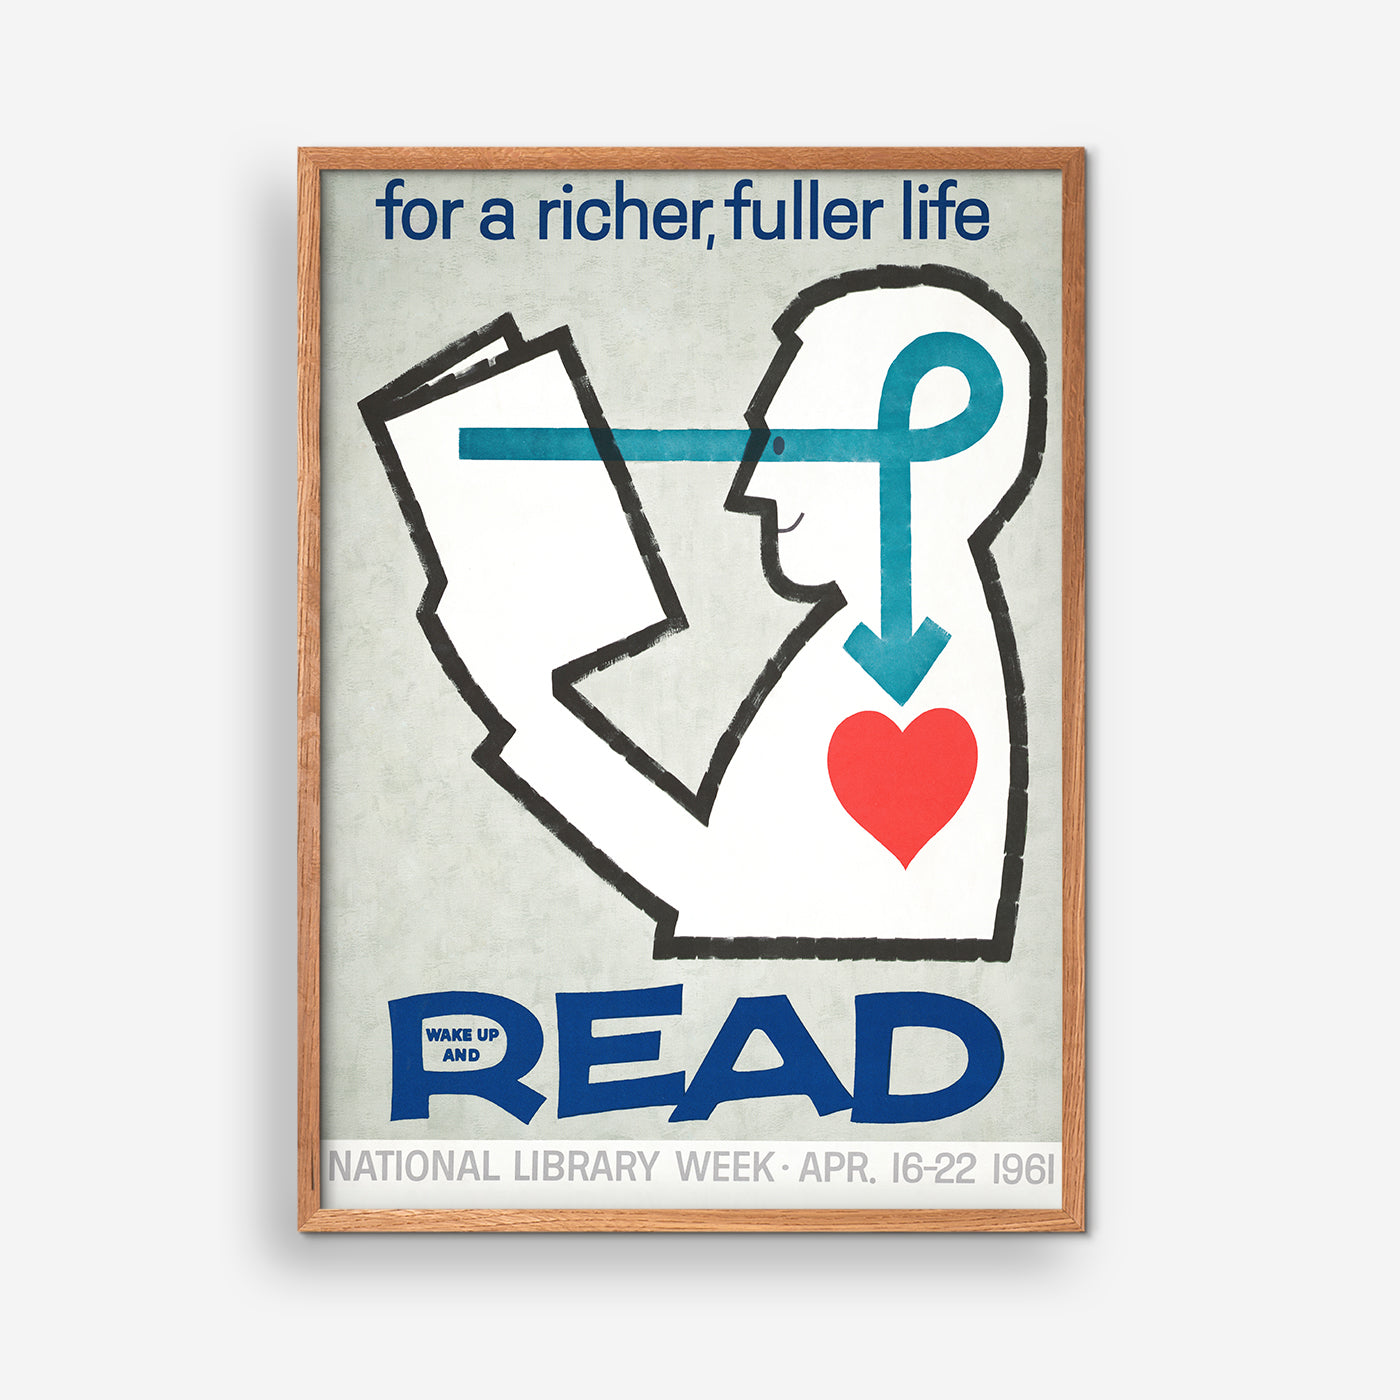 For a richer, fuller life wake up and read, 1961 -  National Library Week